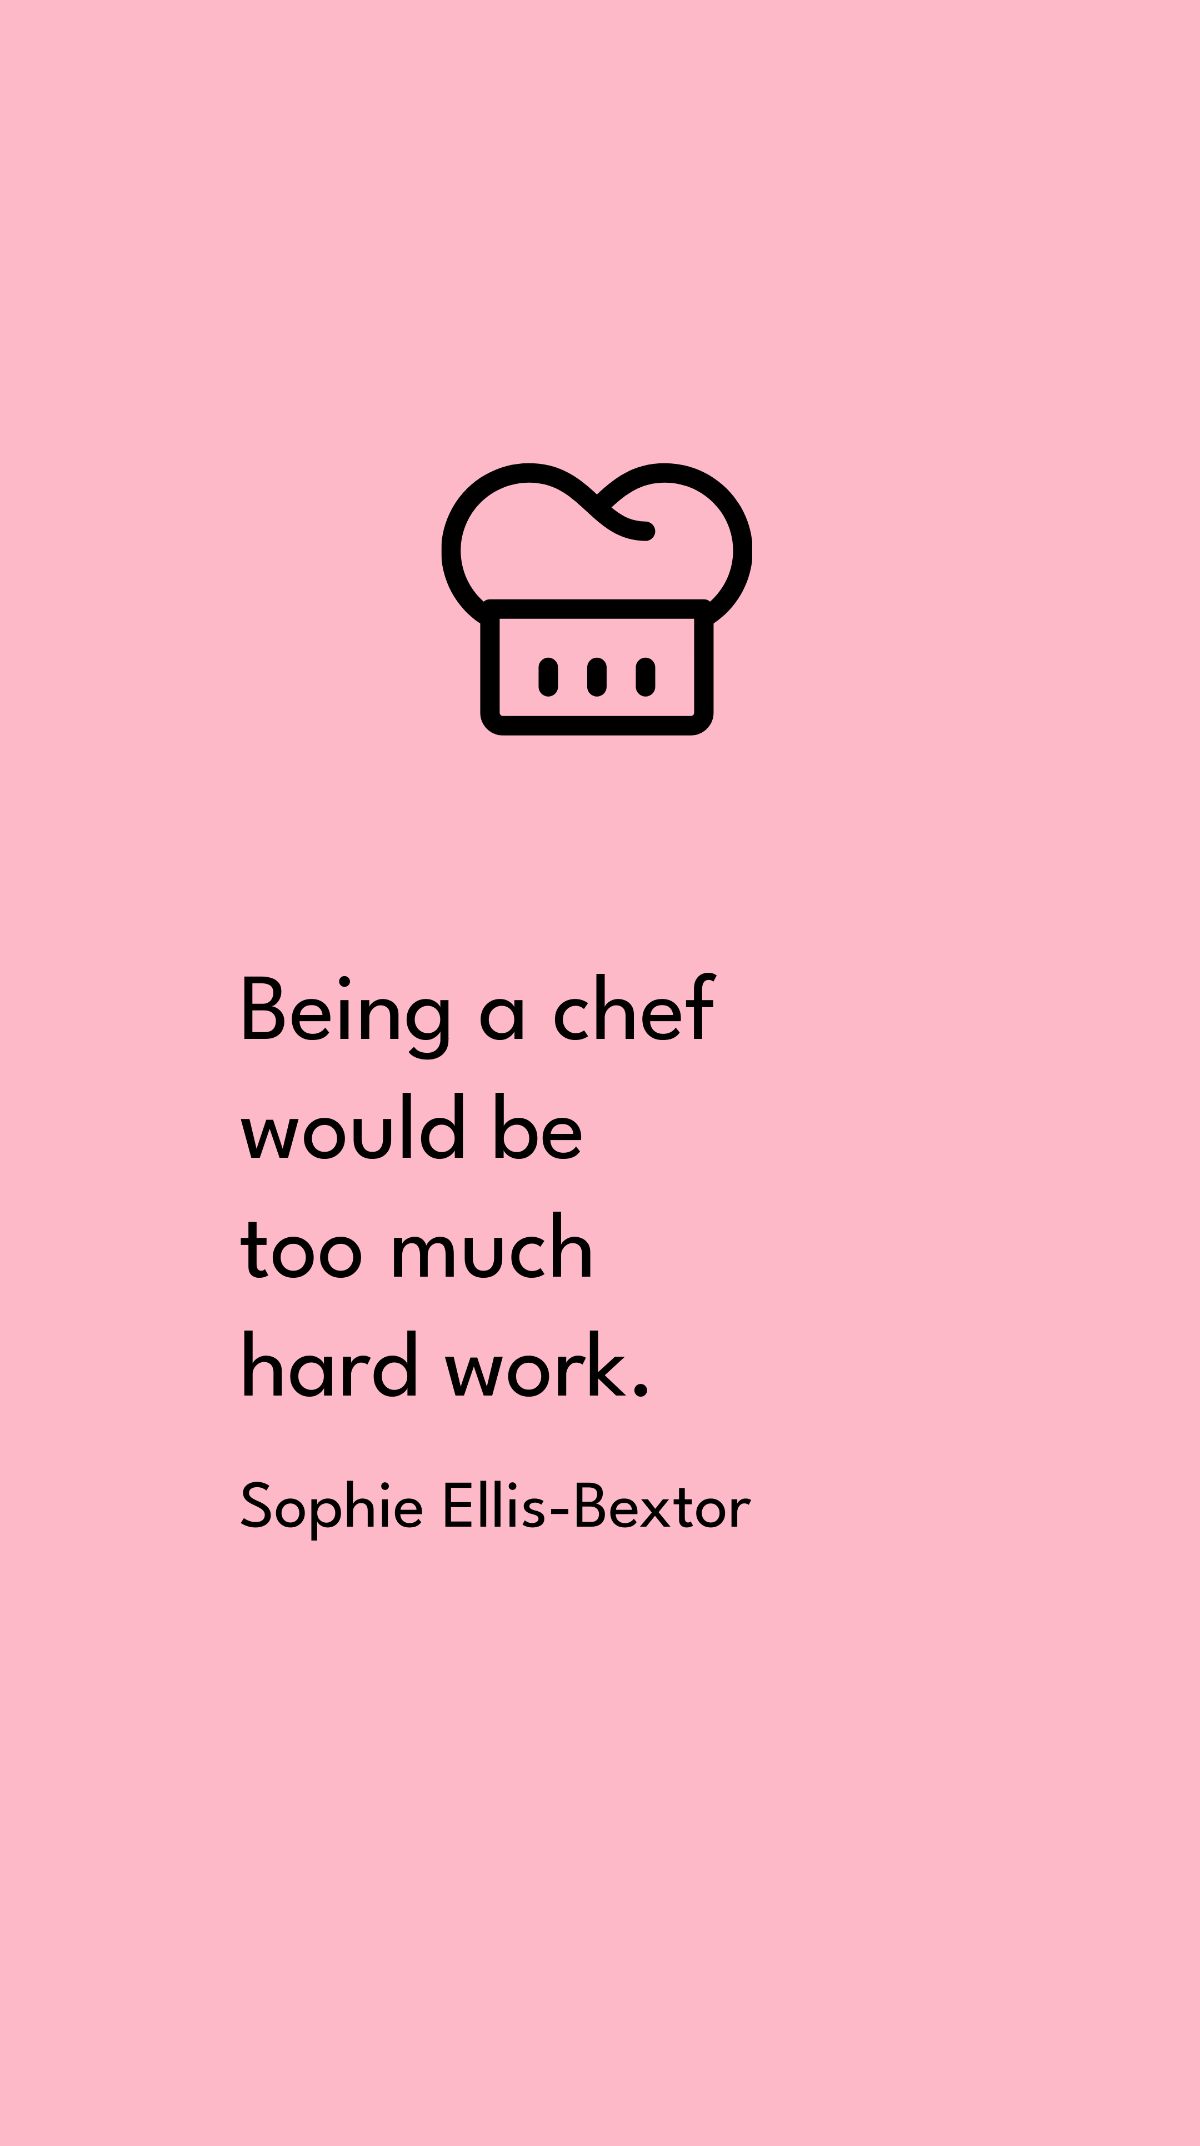 Sophie Ellis-Bextor - Being a chef would be too much hard work. Template